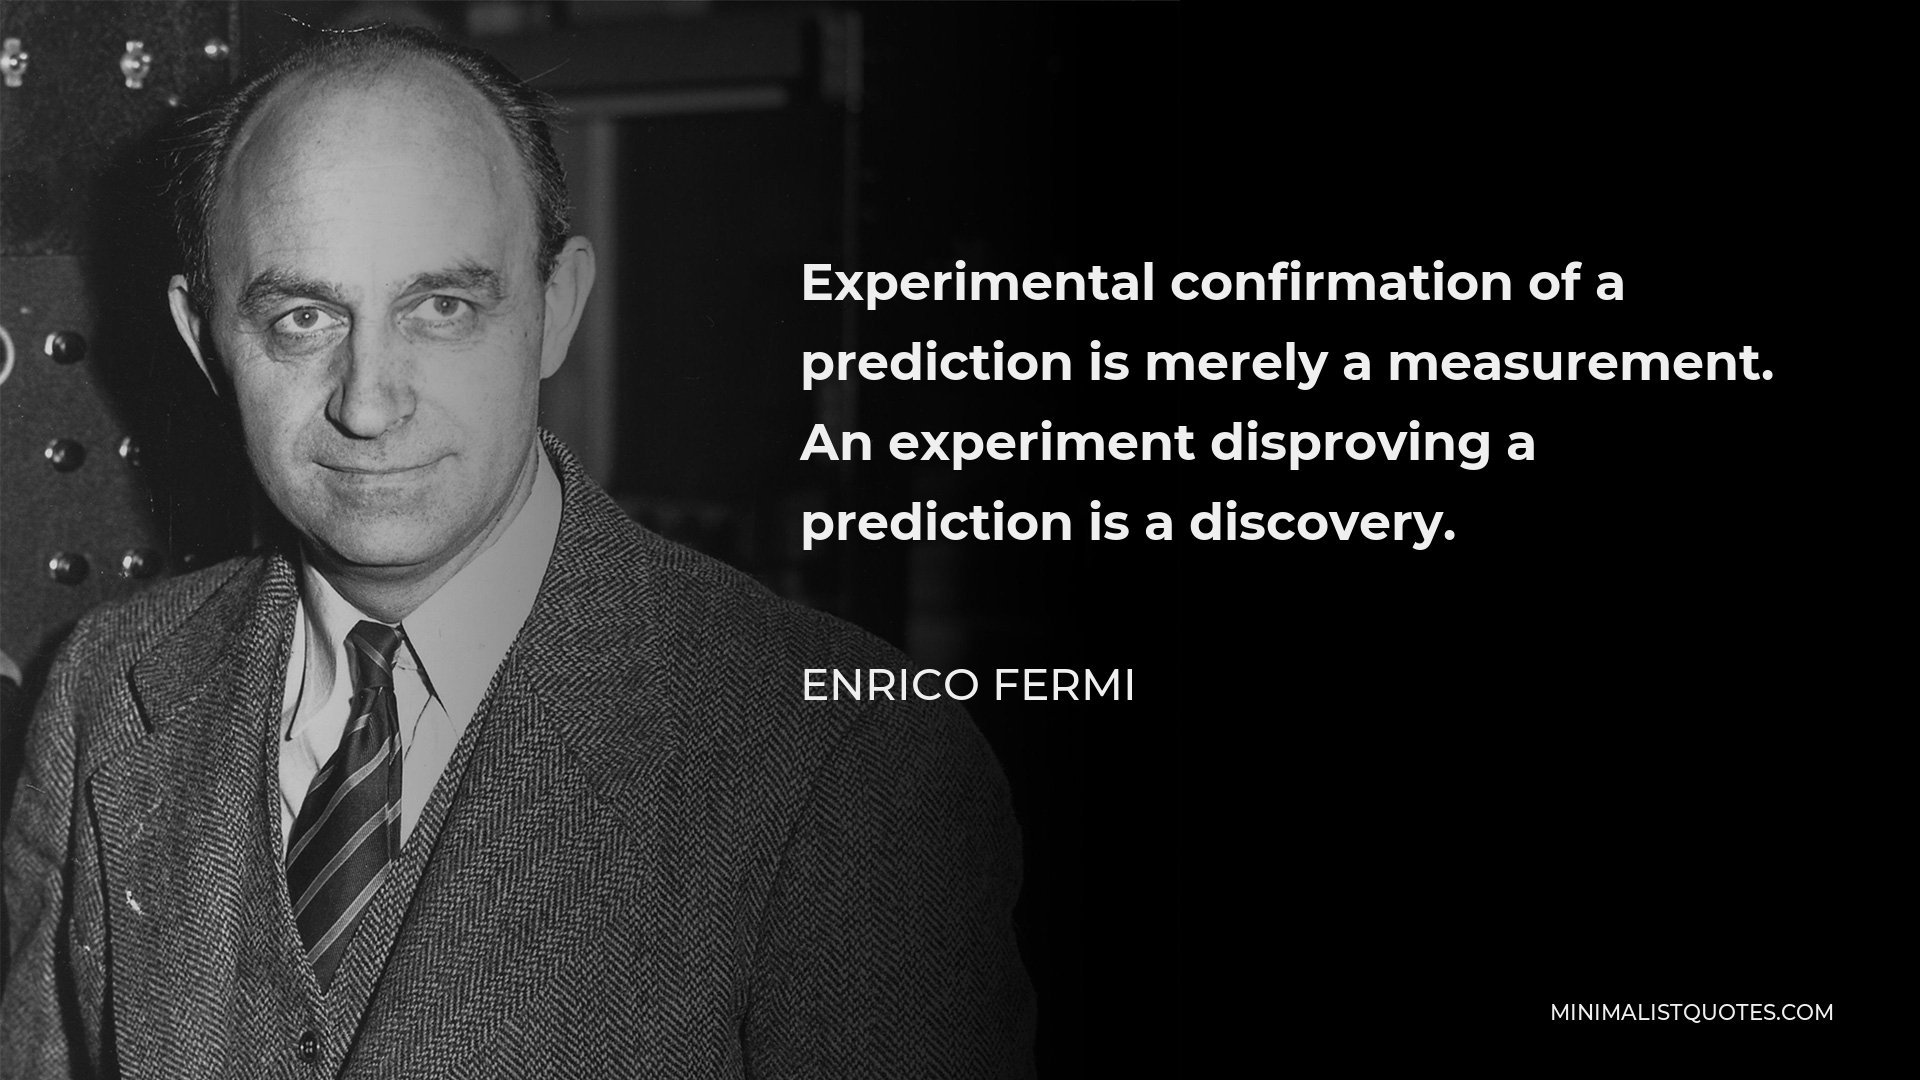 Enrico Fermi Quote - Experimental confirmation of a prediction is merely a measurement. An experiment disproving a prediction is a discovery.